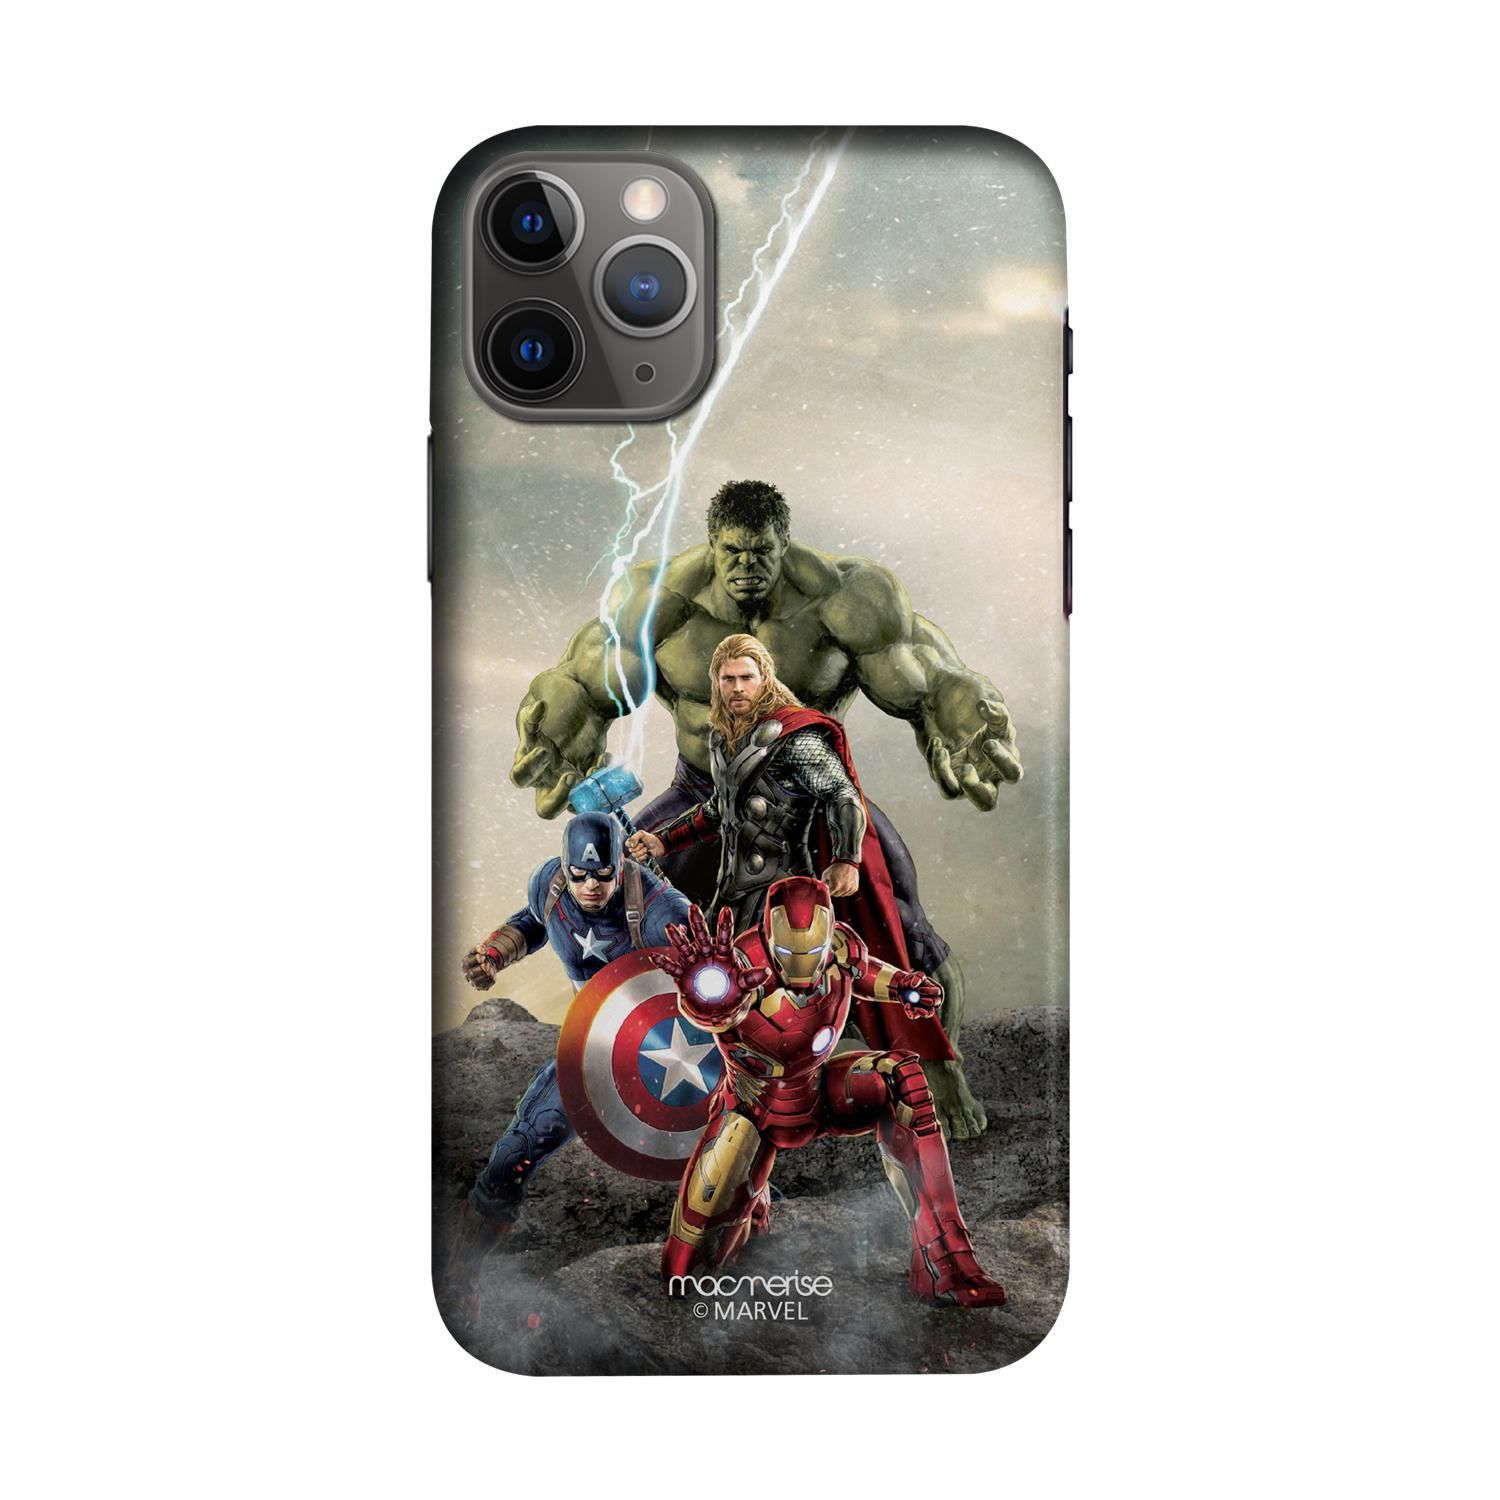 Buy Time to Avenge - Sleek Phone Case for iPhone 11 Pro Max Online